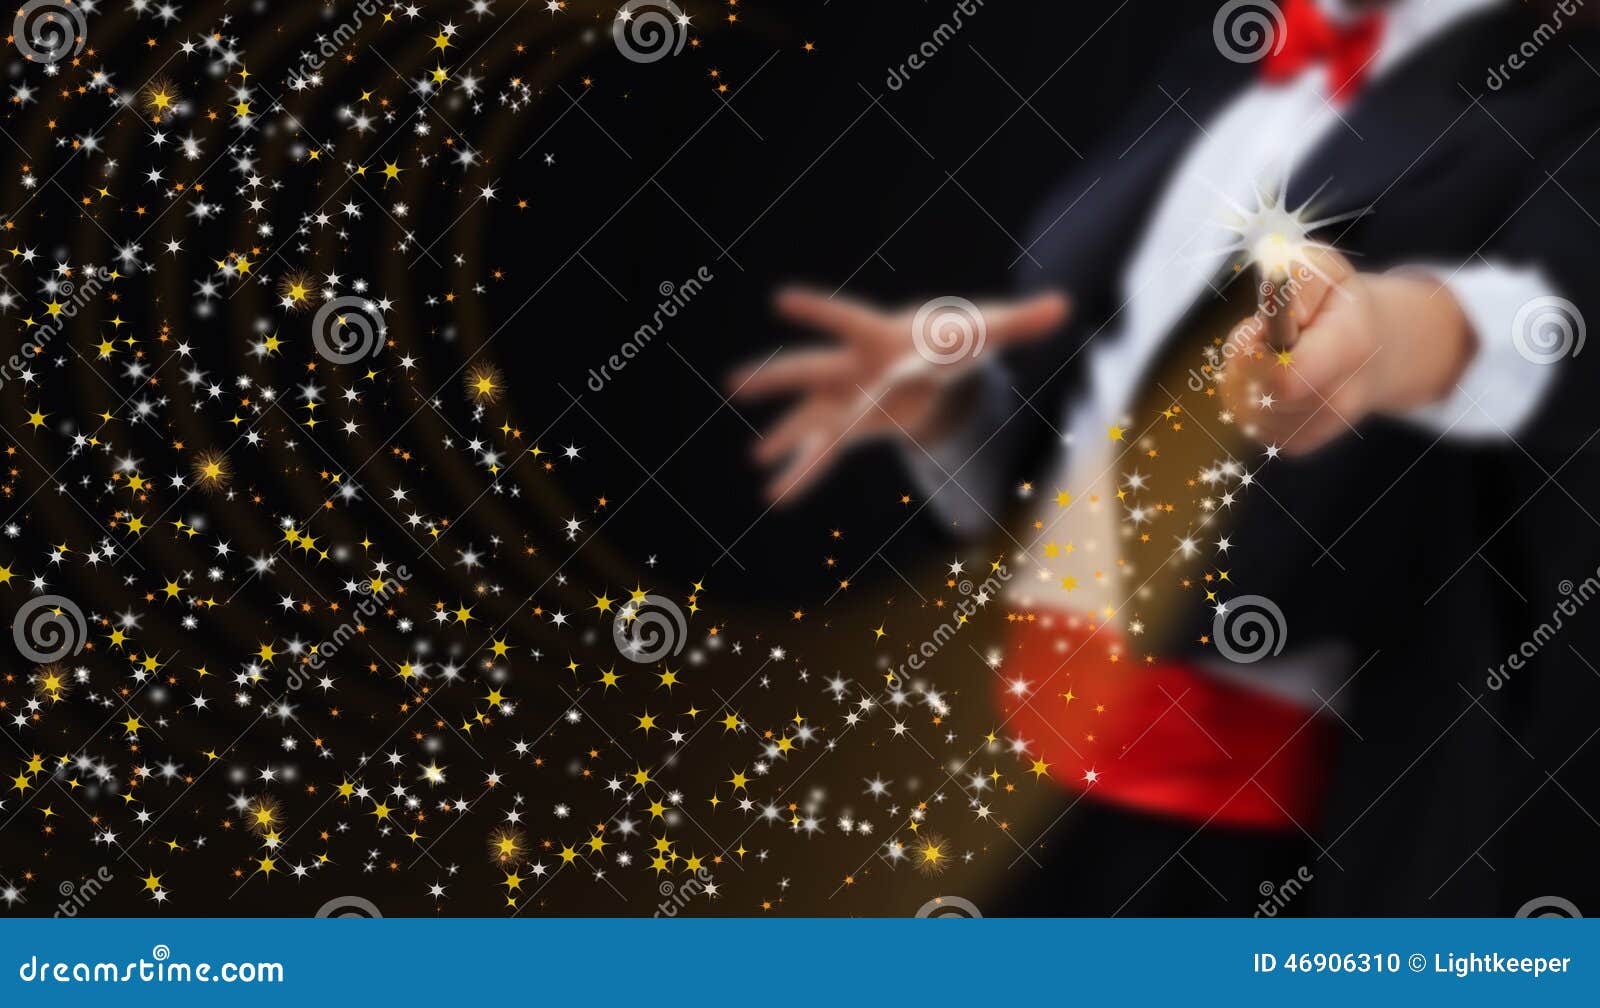 magician hands with sparkling stars